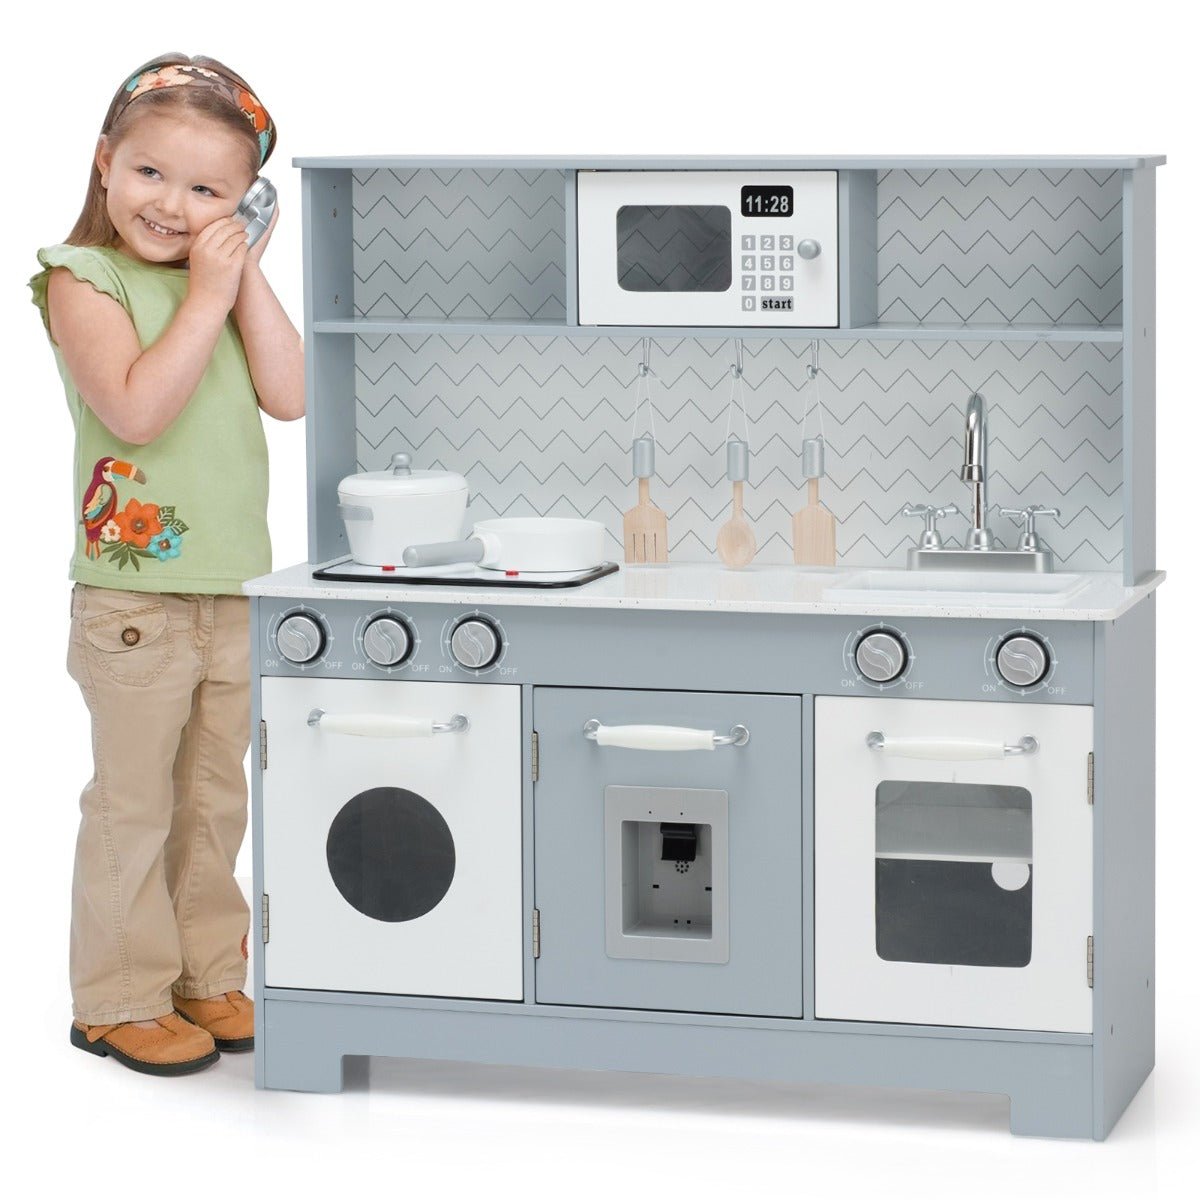 Cooking Creativity Unleashed: Kids Wooden Pretend Kitchen Playset with Accessories